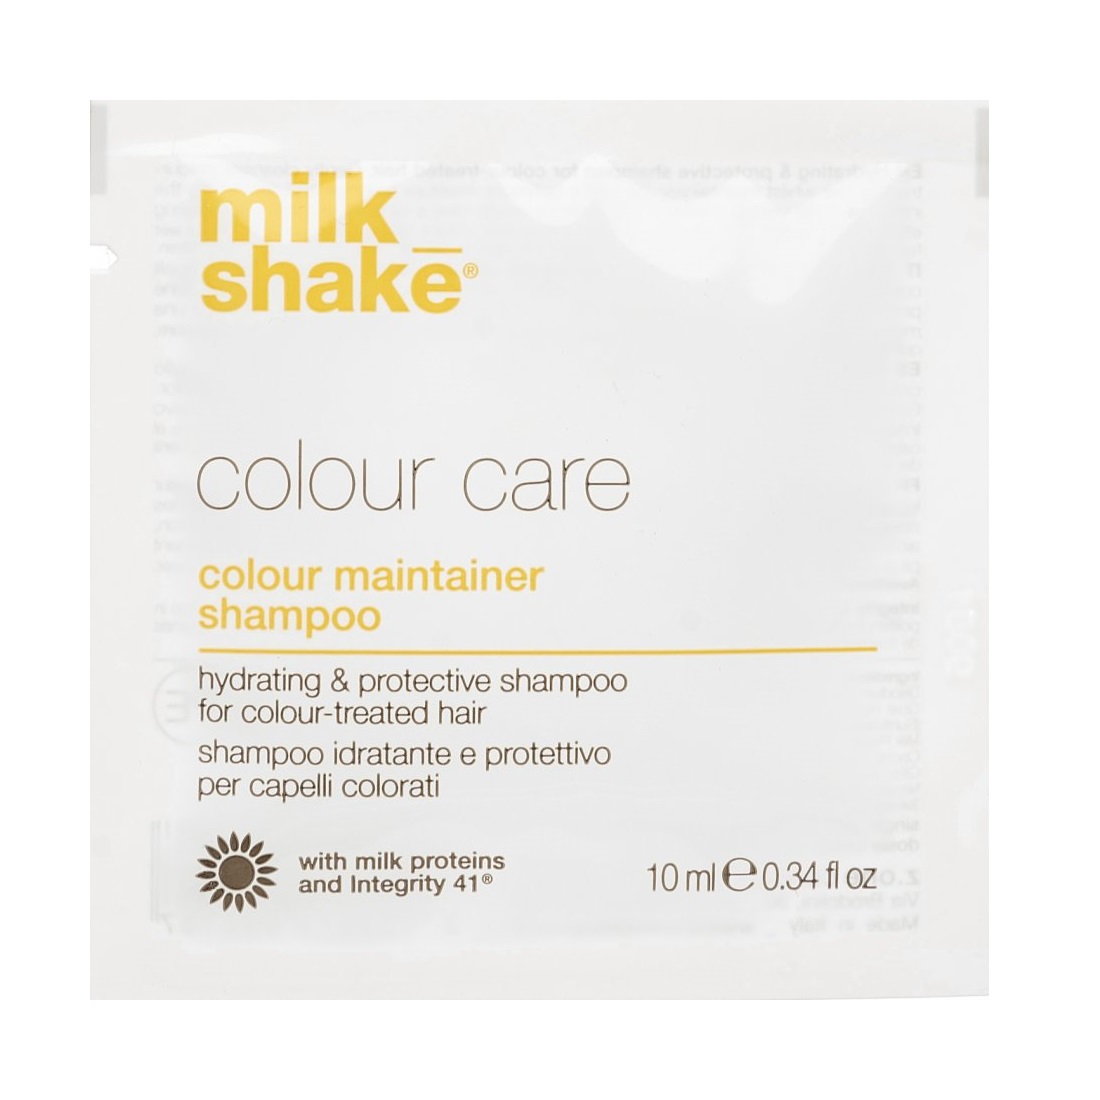 Sampon Milk Shake Color Care Maintainer, 10ml